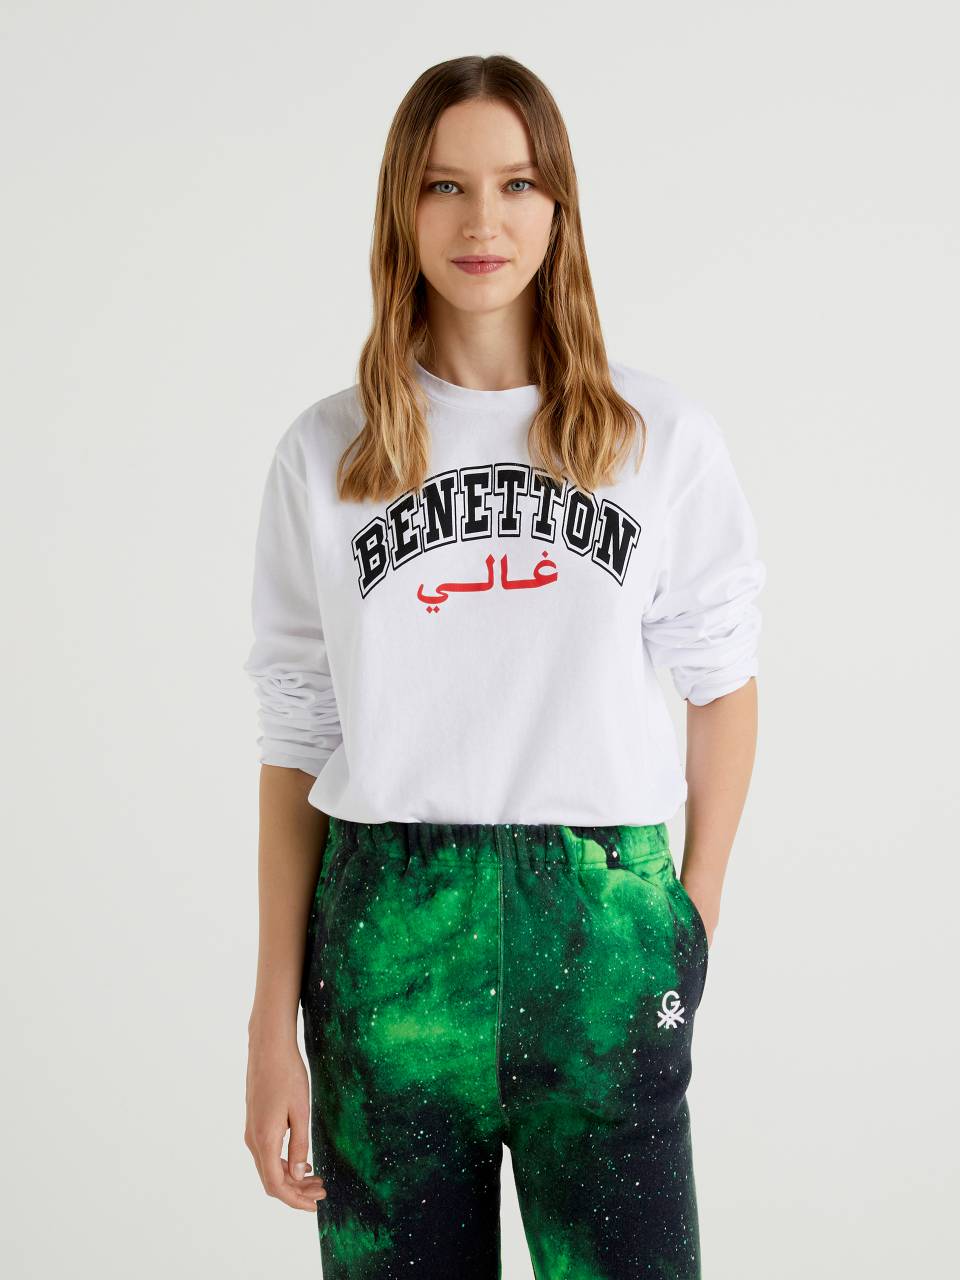 Benetton Long sleeve t-shirt with print by Ghali. 1